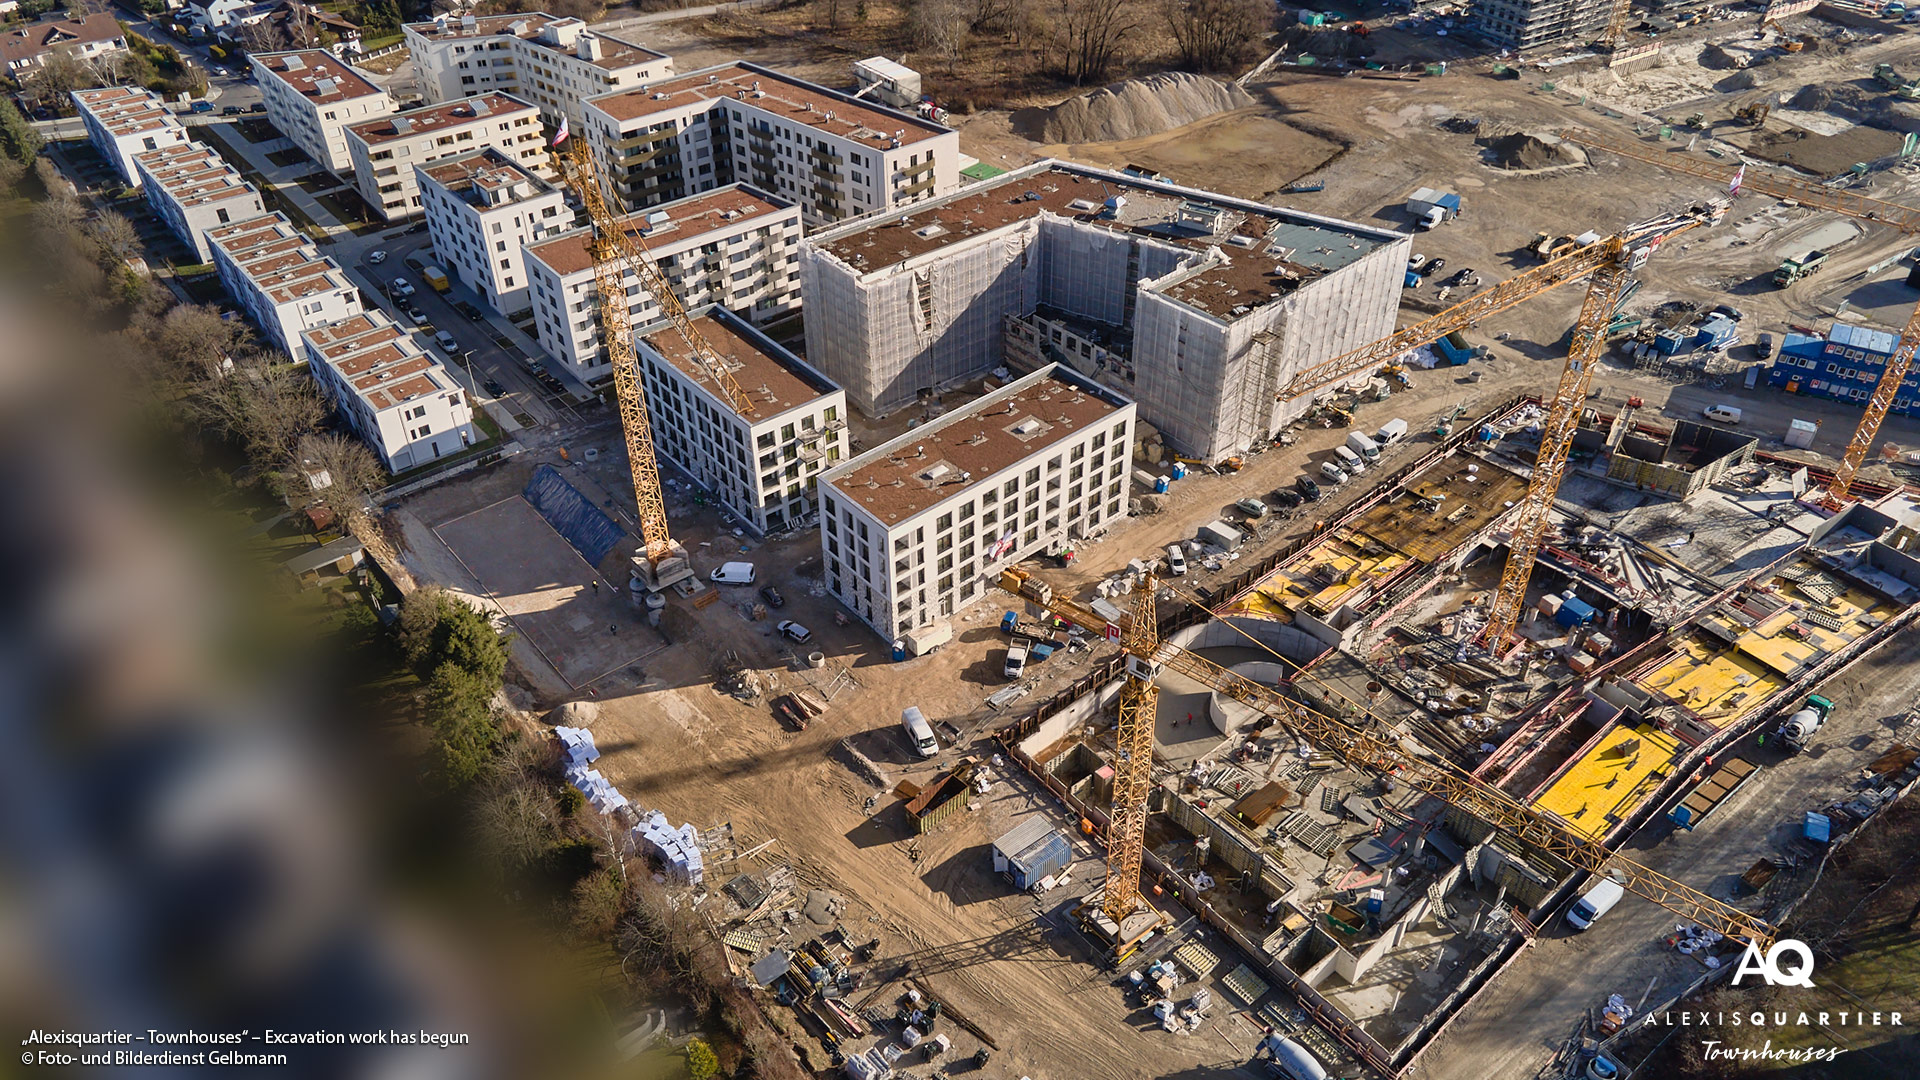 'ALEXISQUARTIER - Townhouses' in Munich-Perlach: Start of the earthworks 